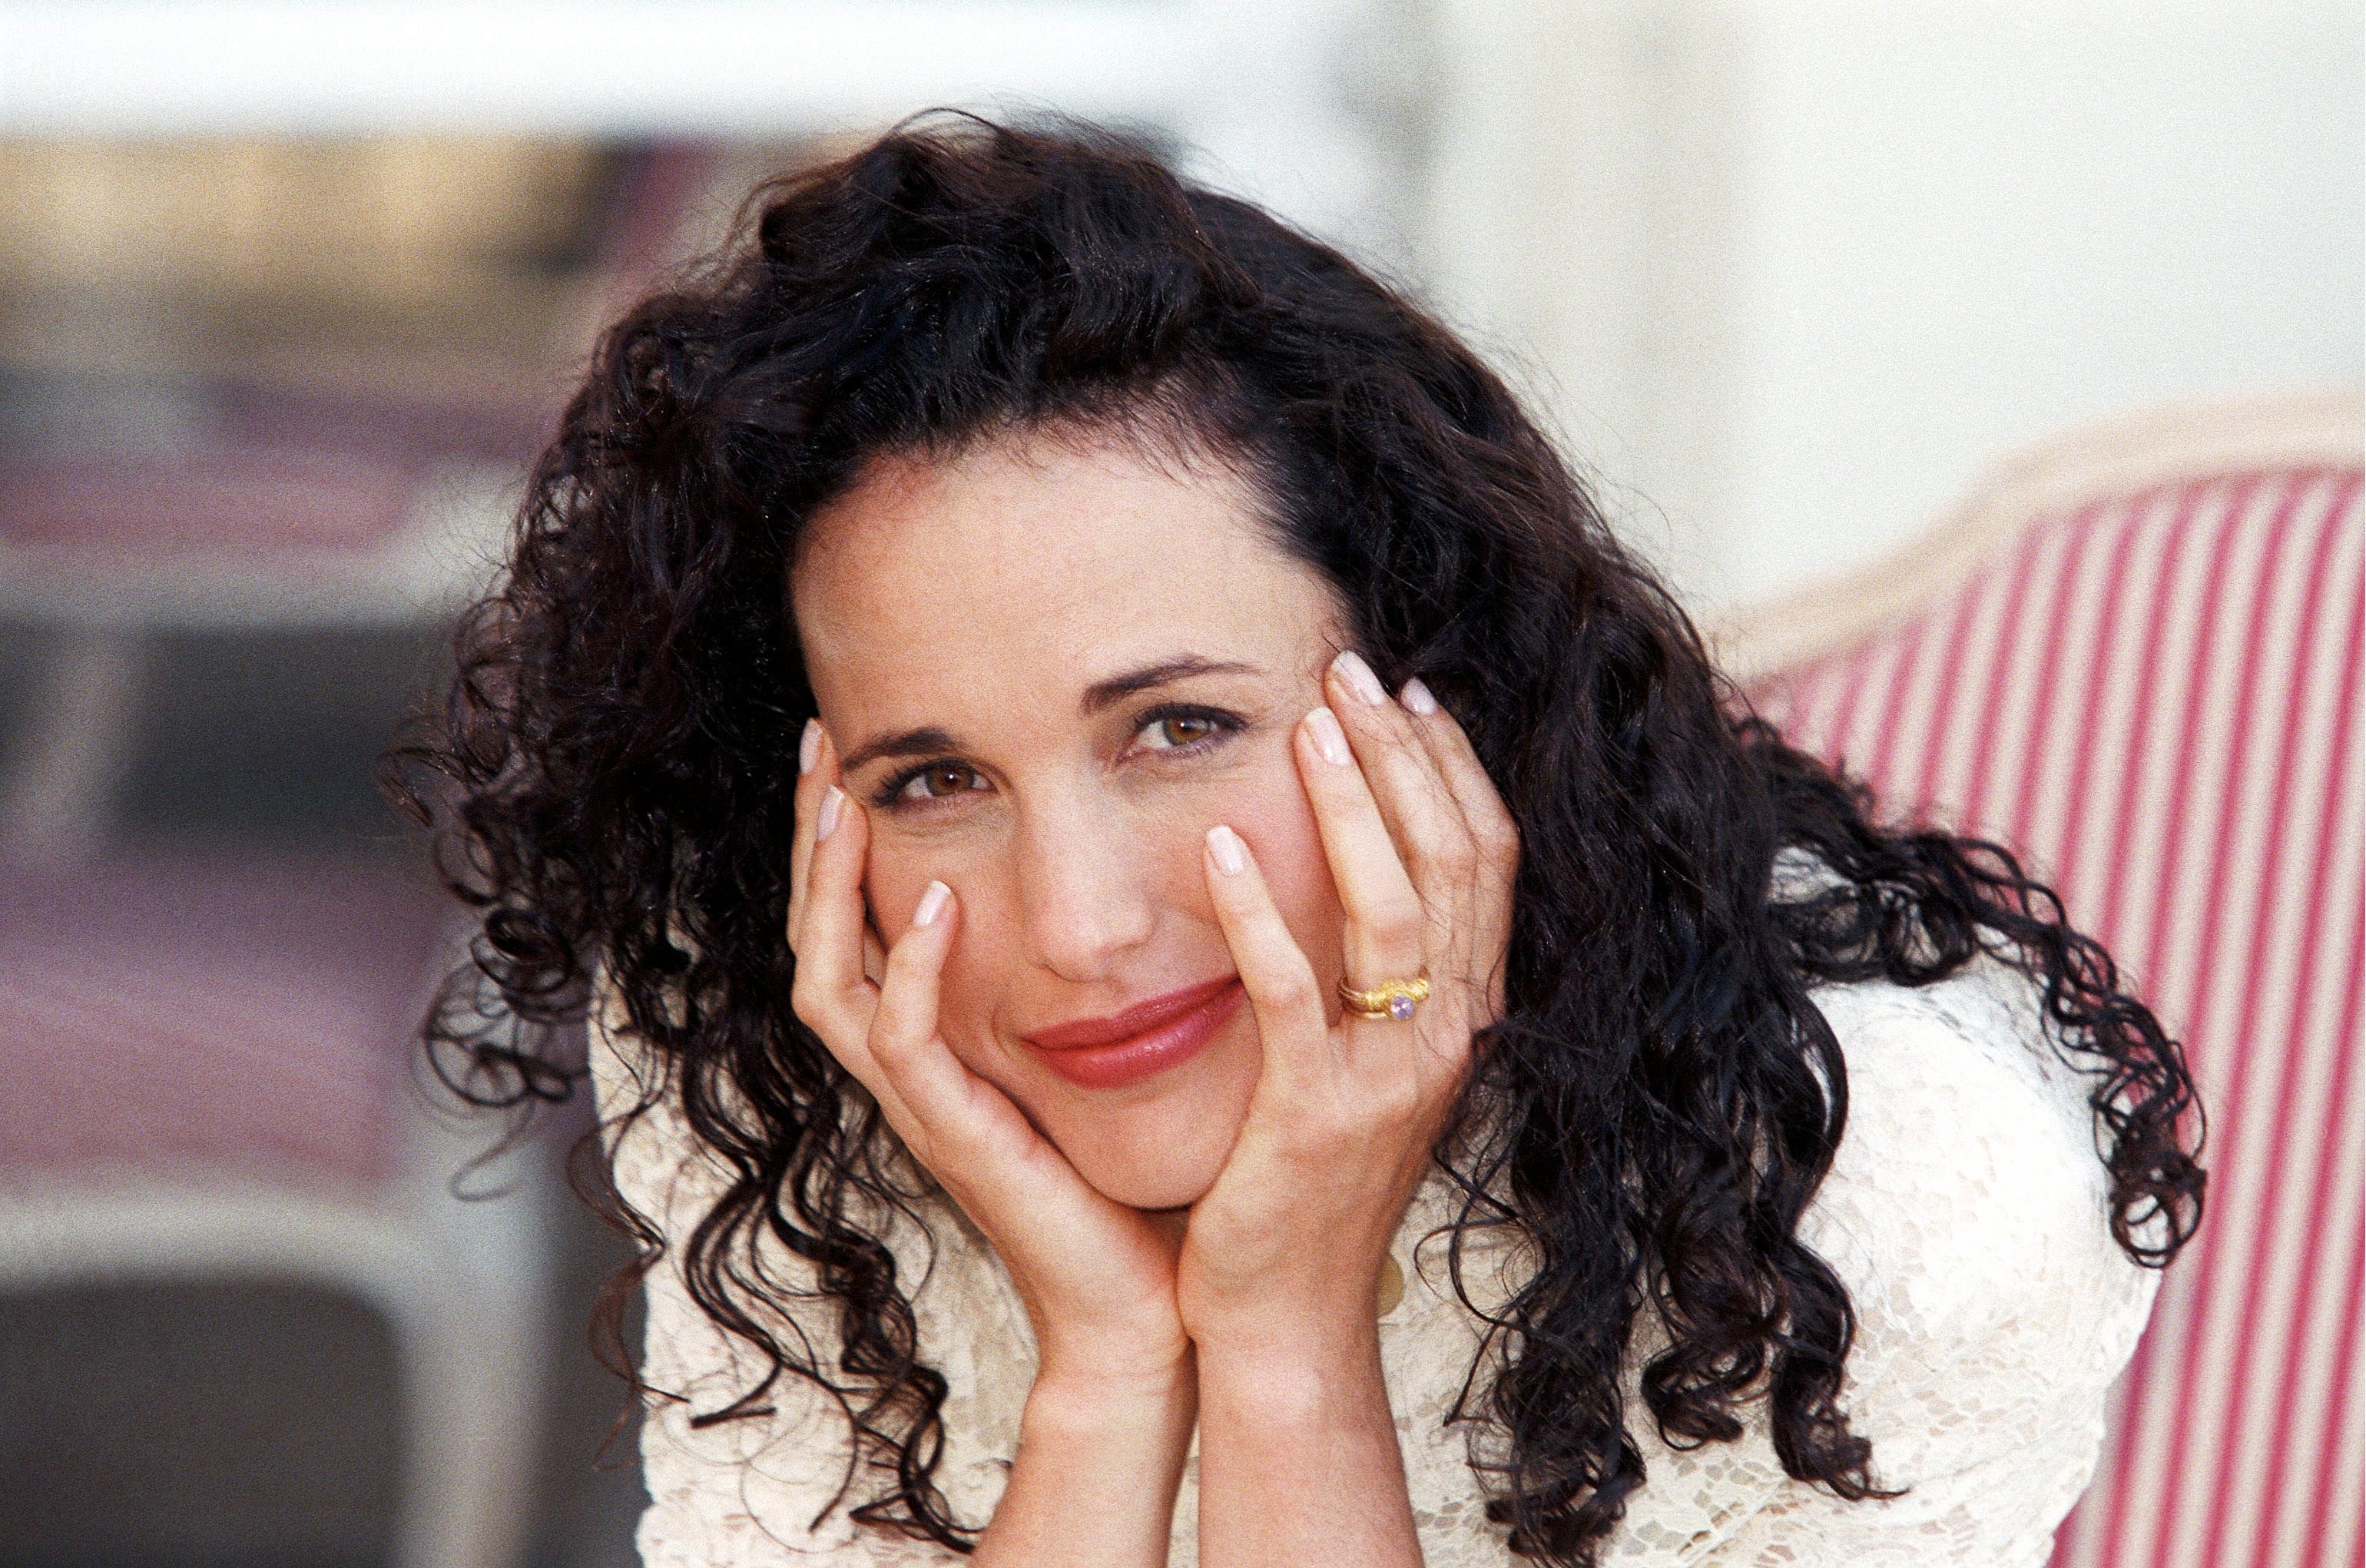 Andie MacDowell, poses for a portrait in Deauville, France on September 7, 1996. | Source: Getty Images